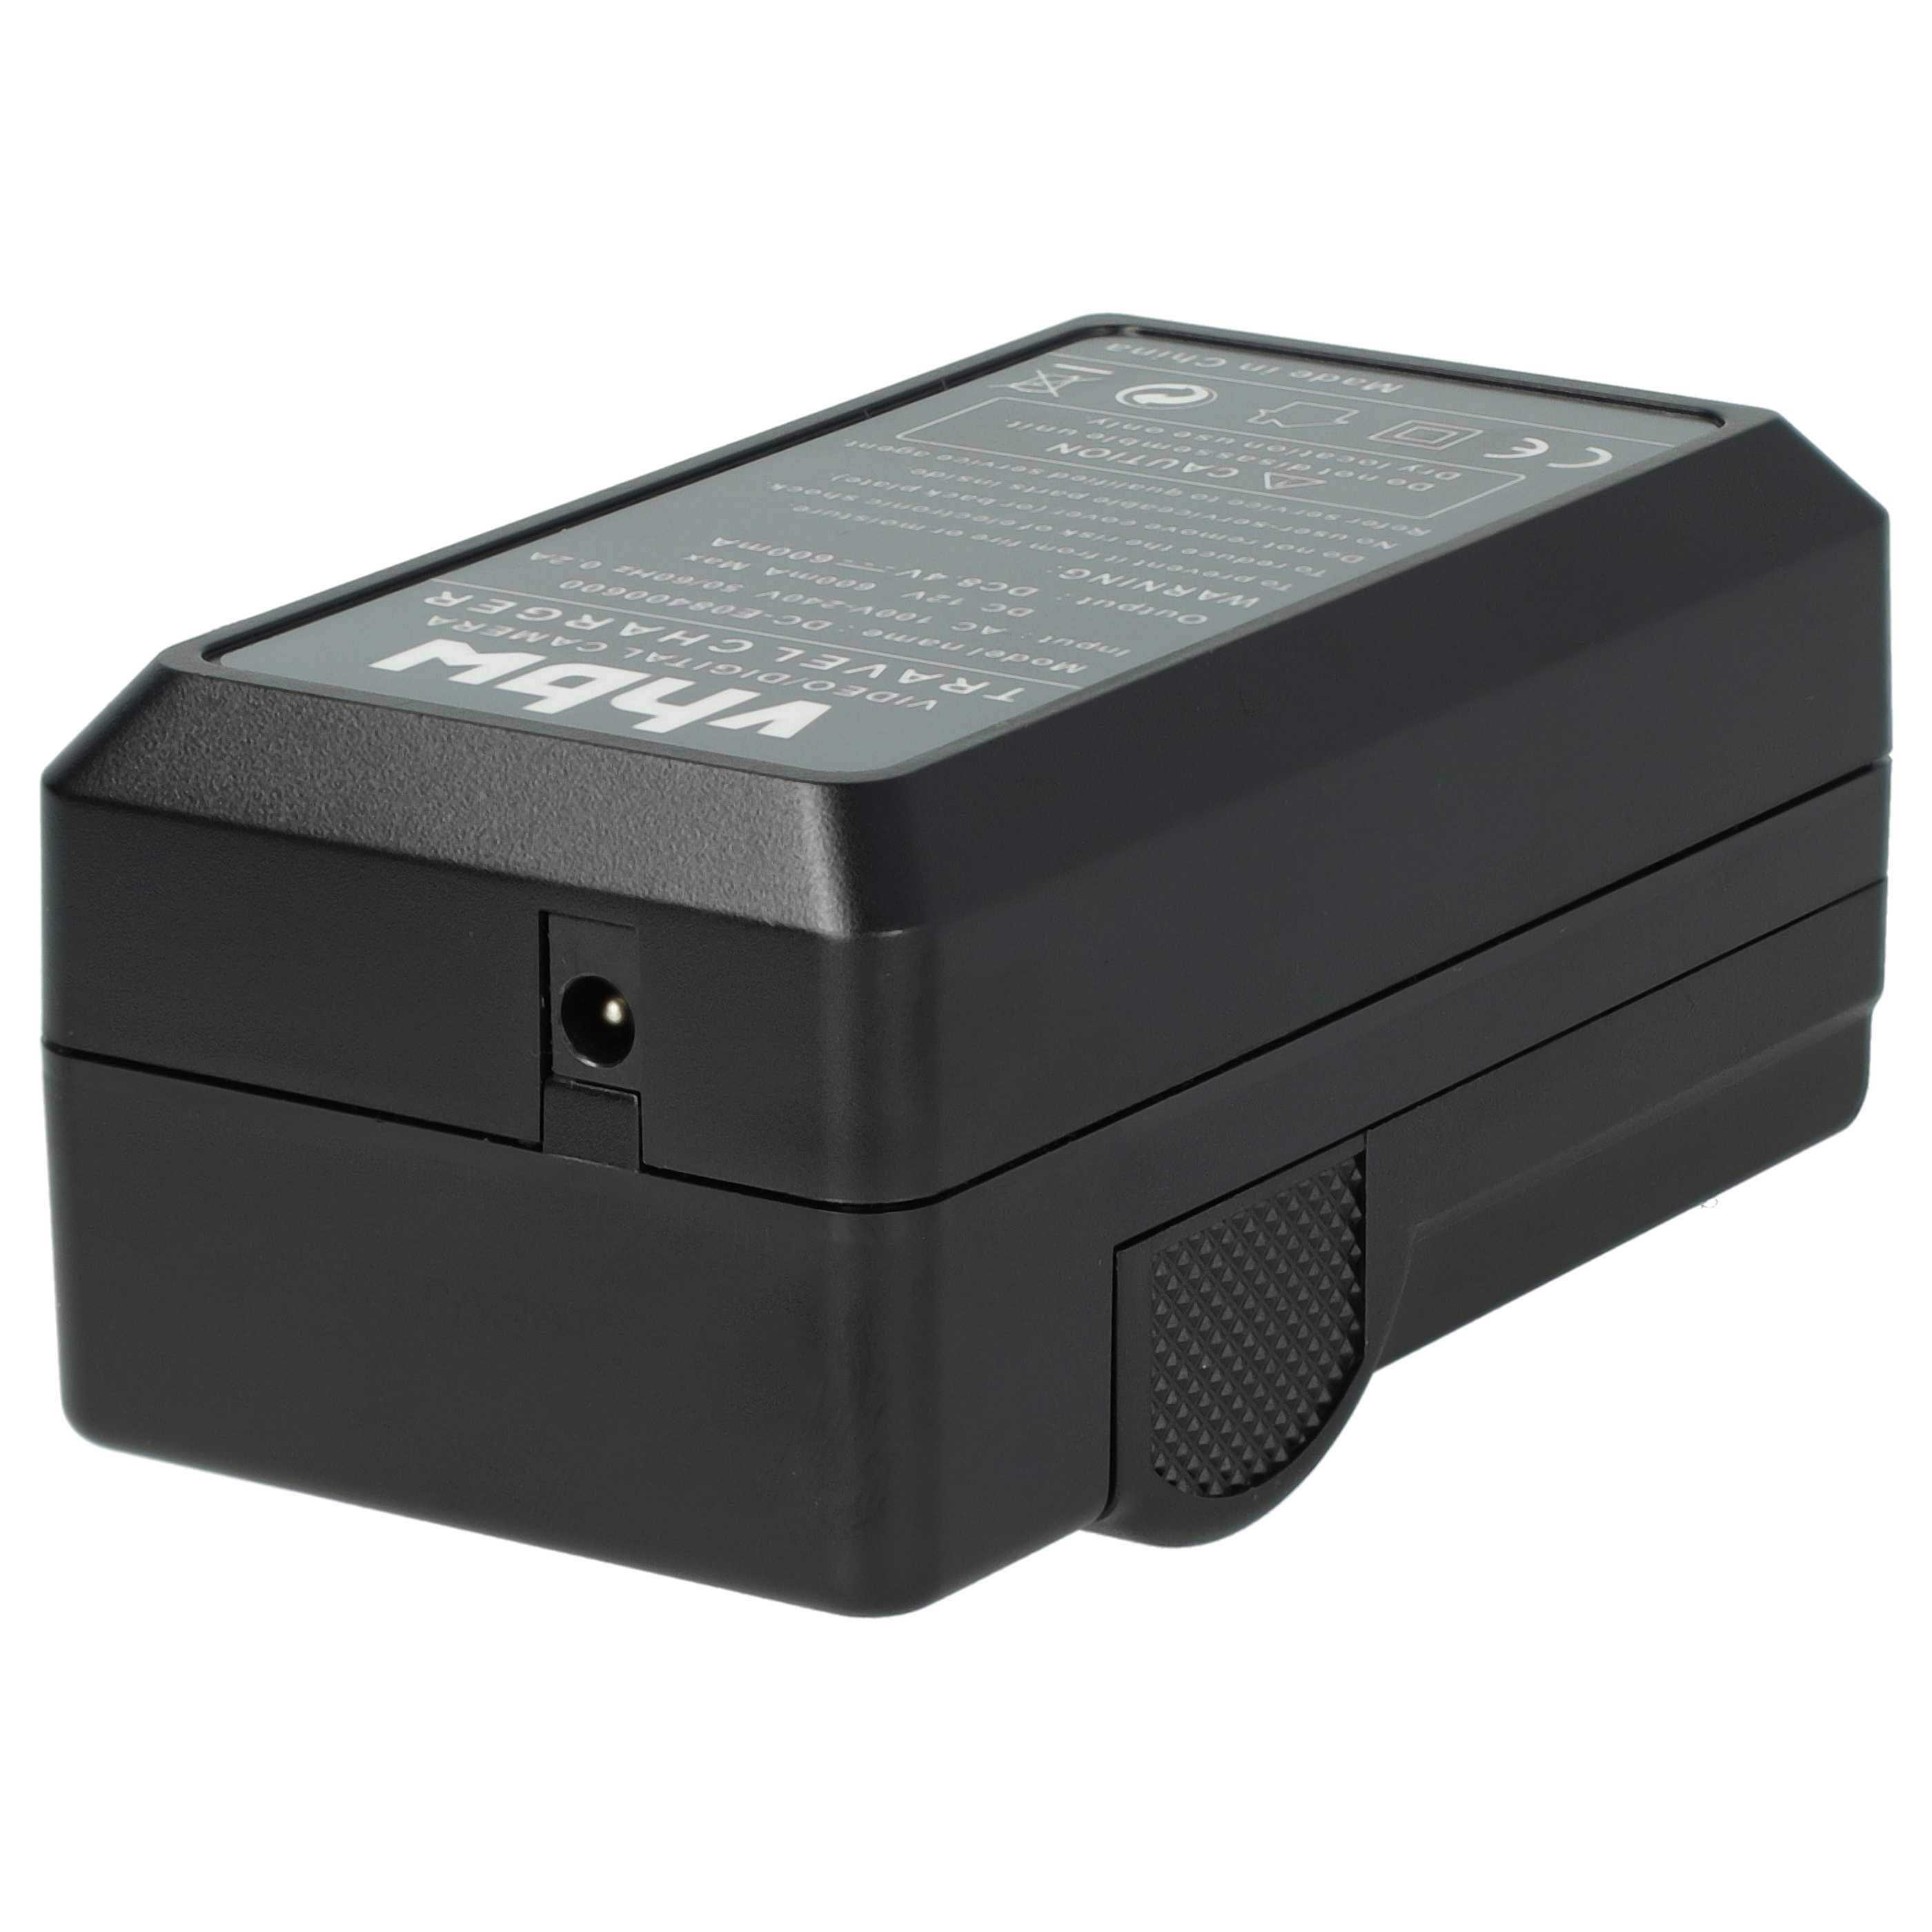 Battery Charger suitable for Lumix DC-GH5 Camera etc. - 0.6 A, 8.4 V